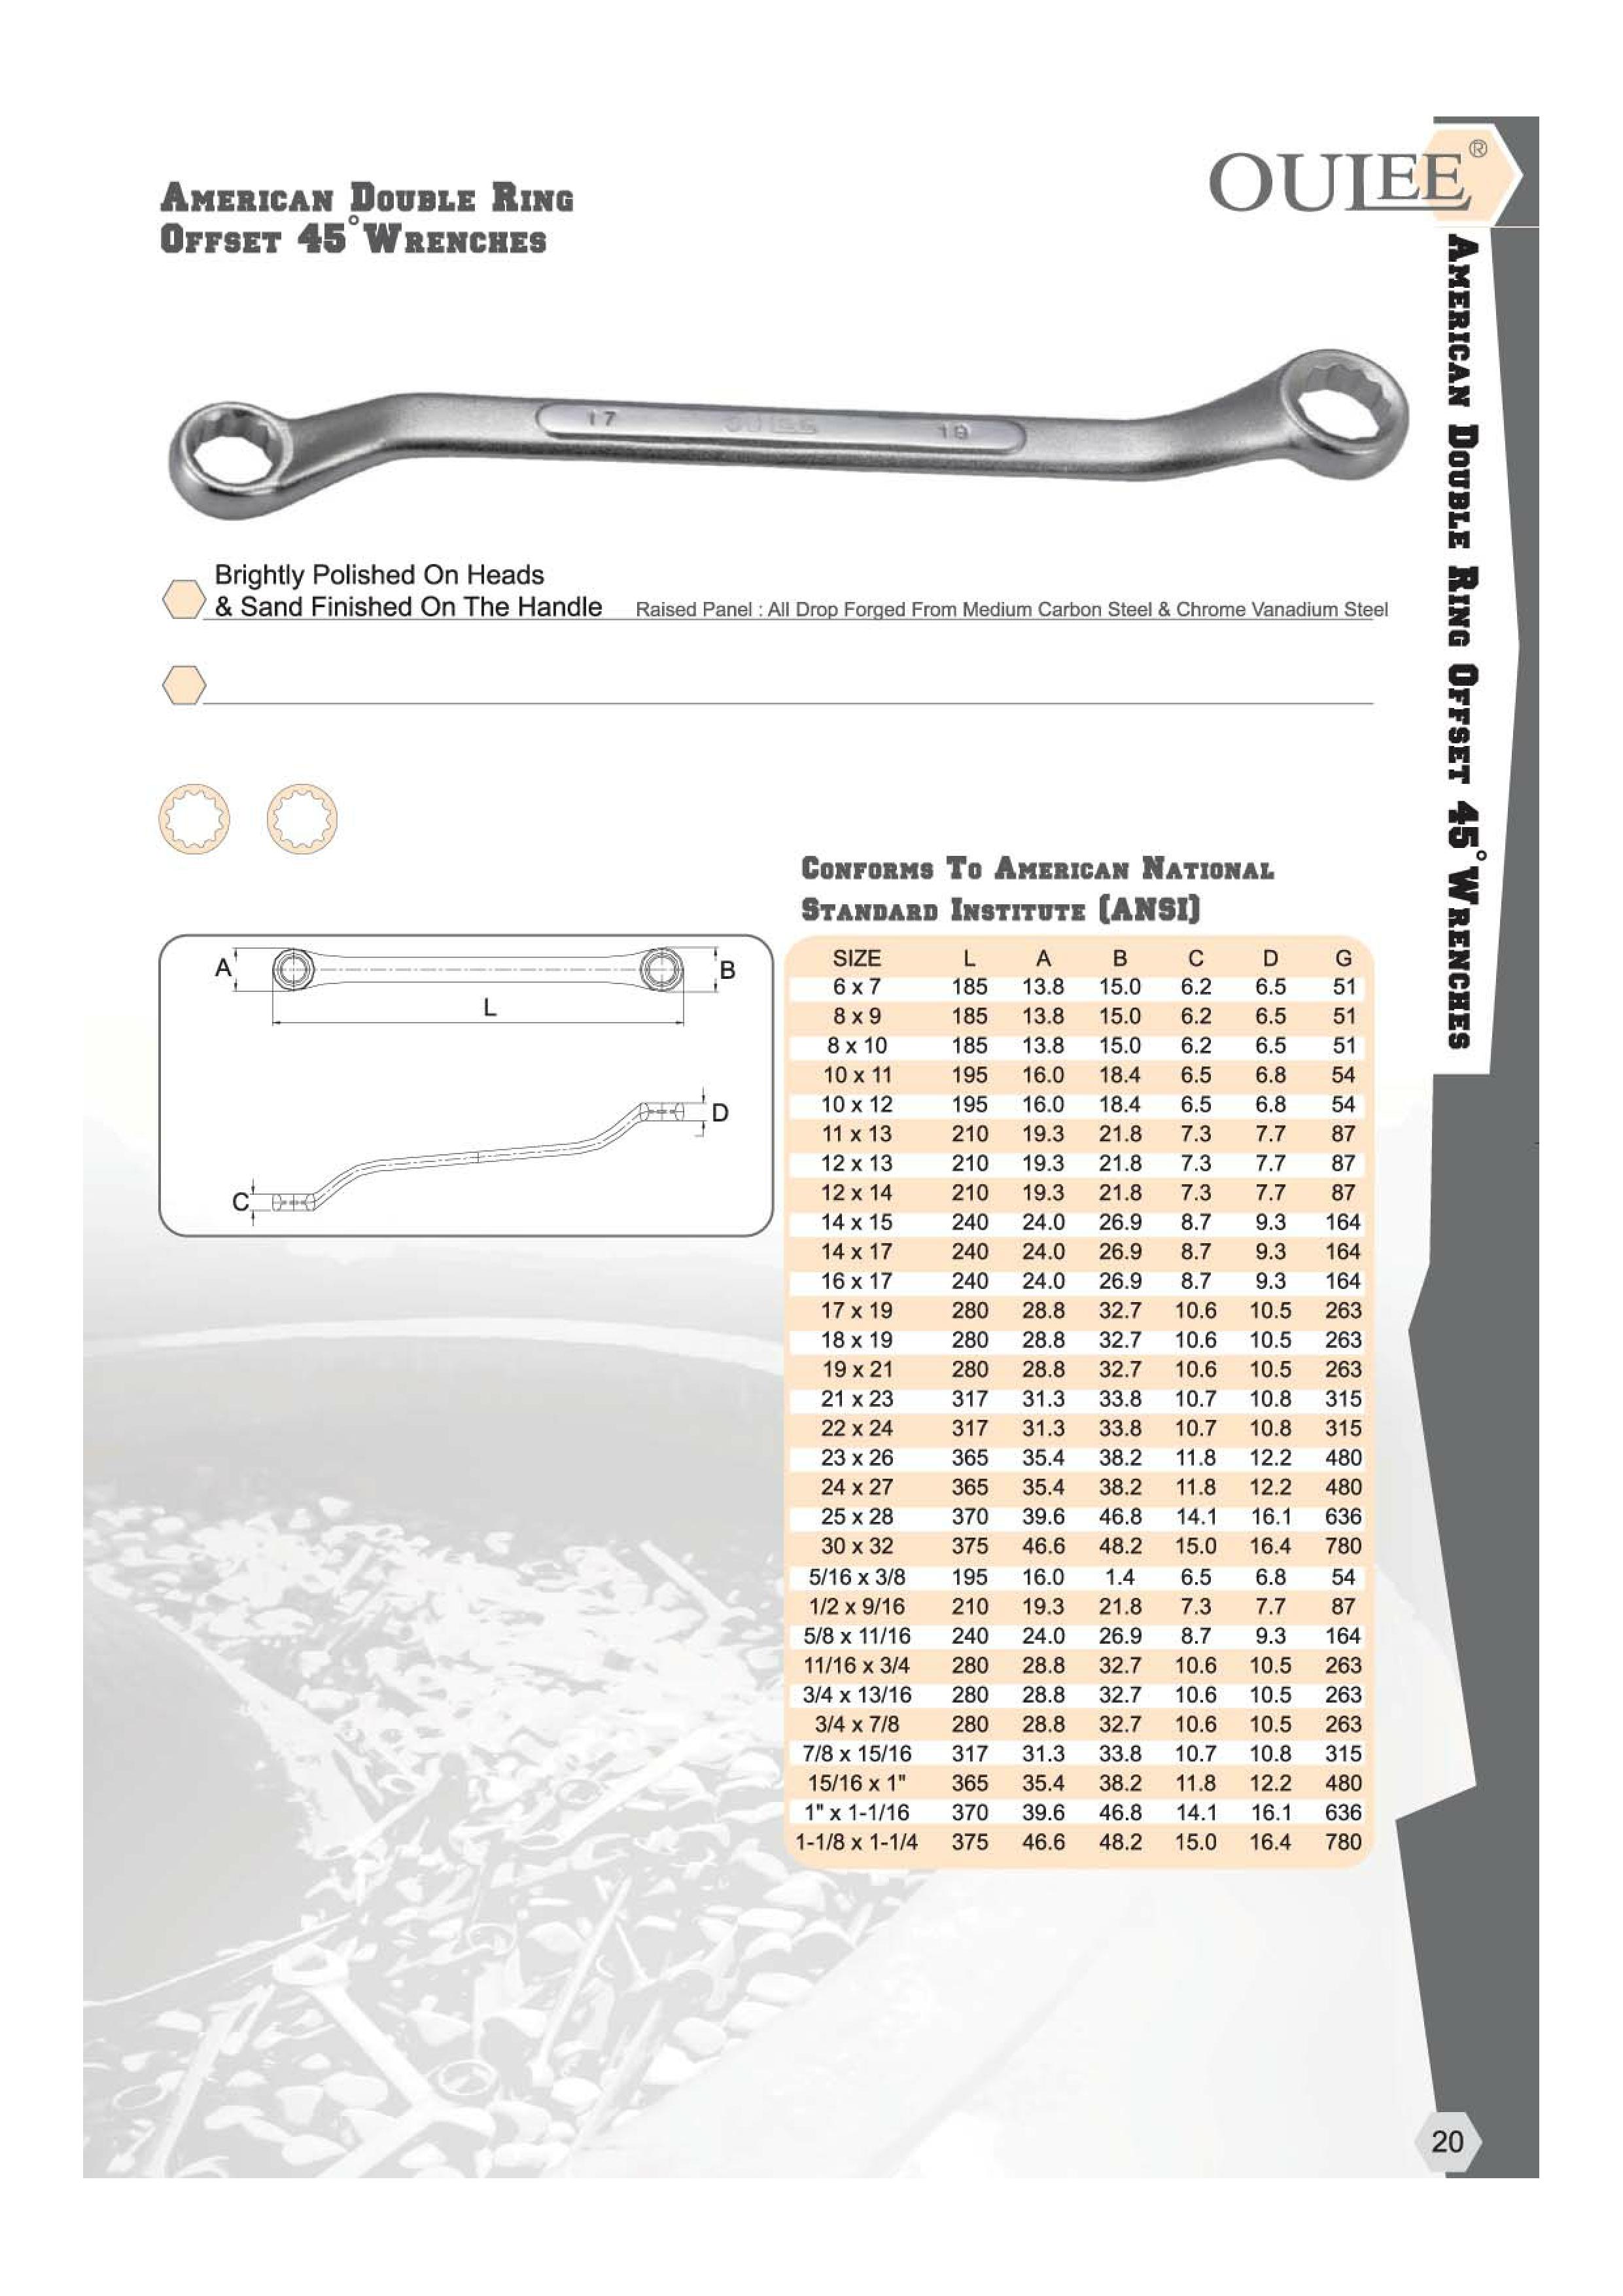 American double ring offset 45 wrenches